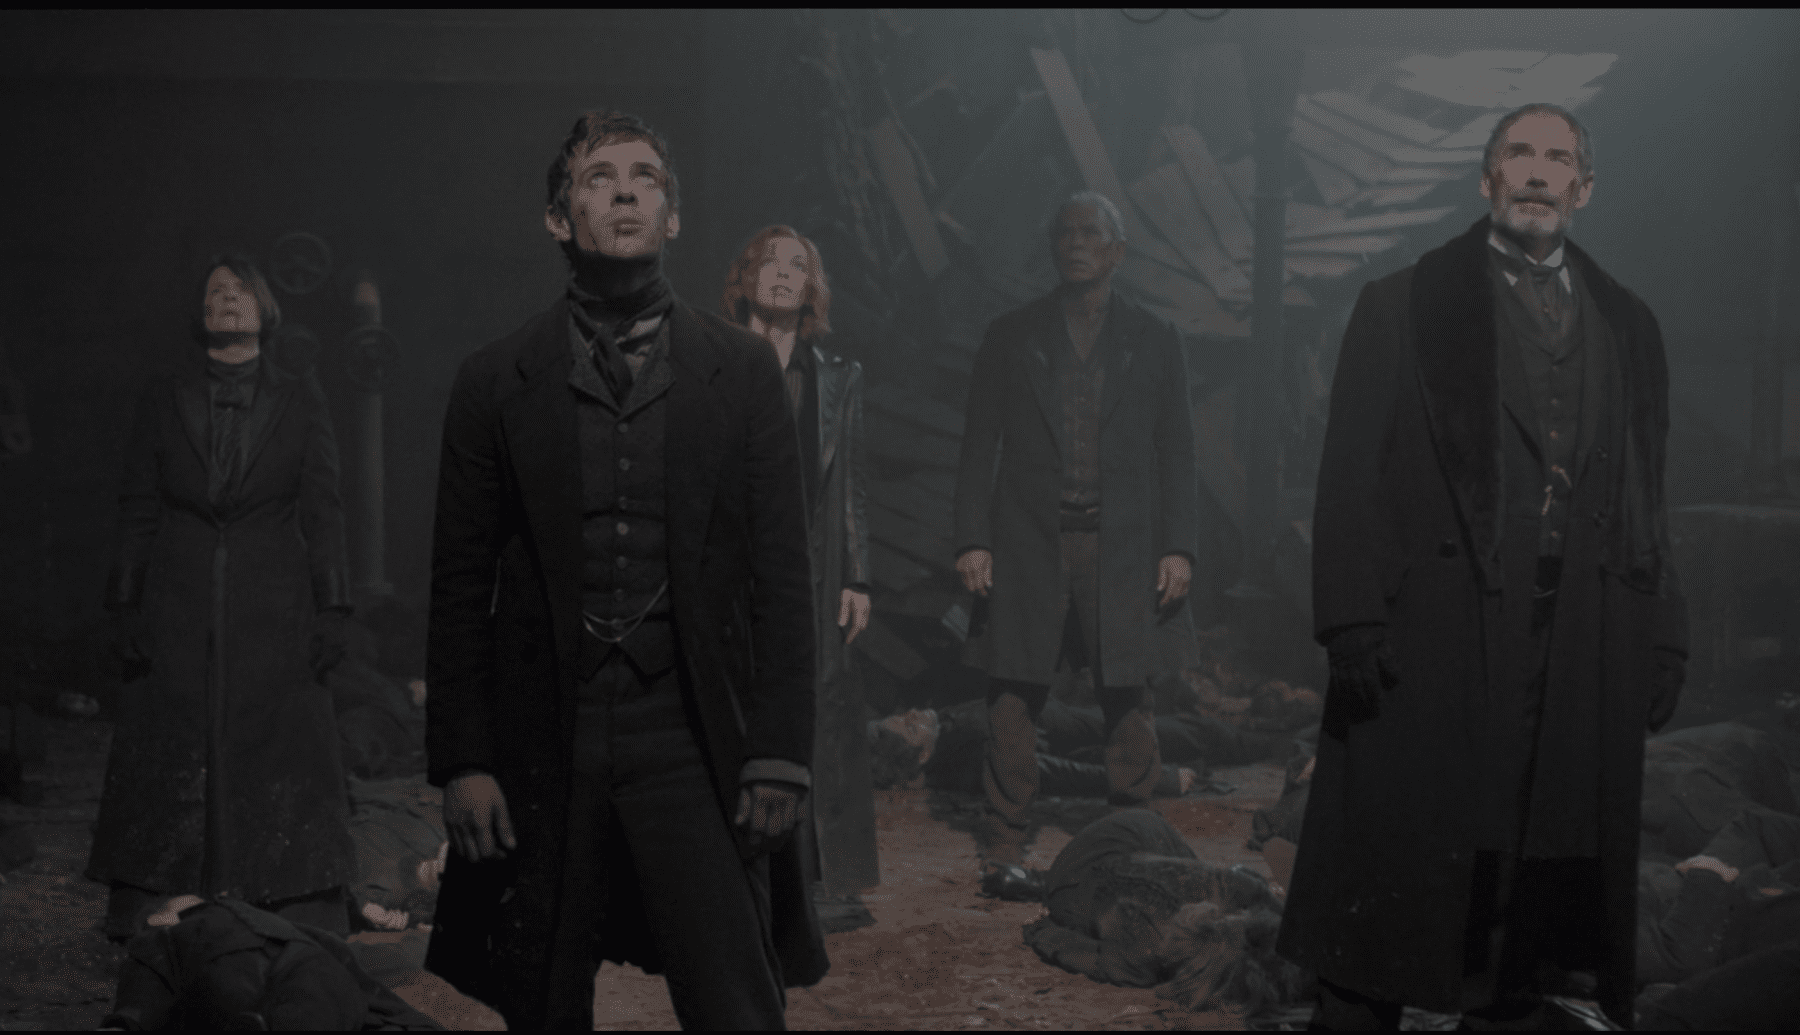 The heroes of Penny Dreadful stand together at the end of the final battle in the season 3 finale.